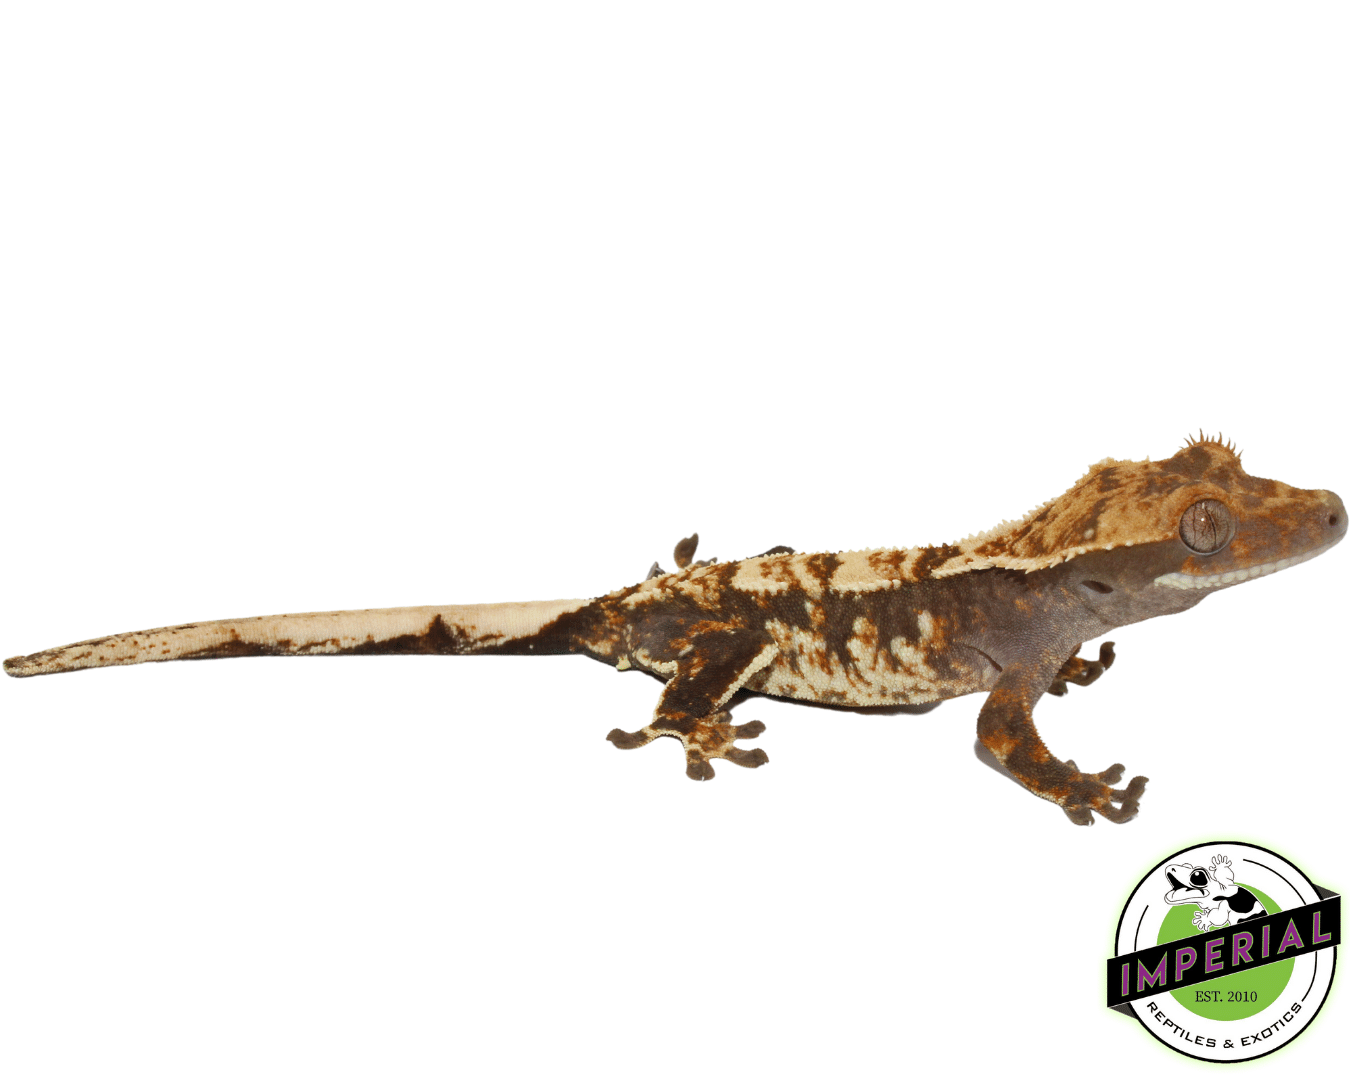 crested gecko for sale online, buy crested geckos at cheap prices